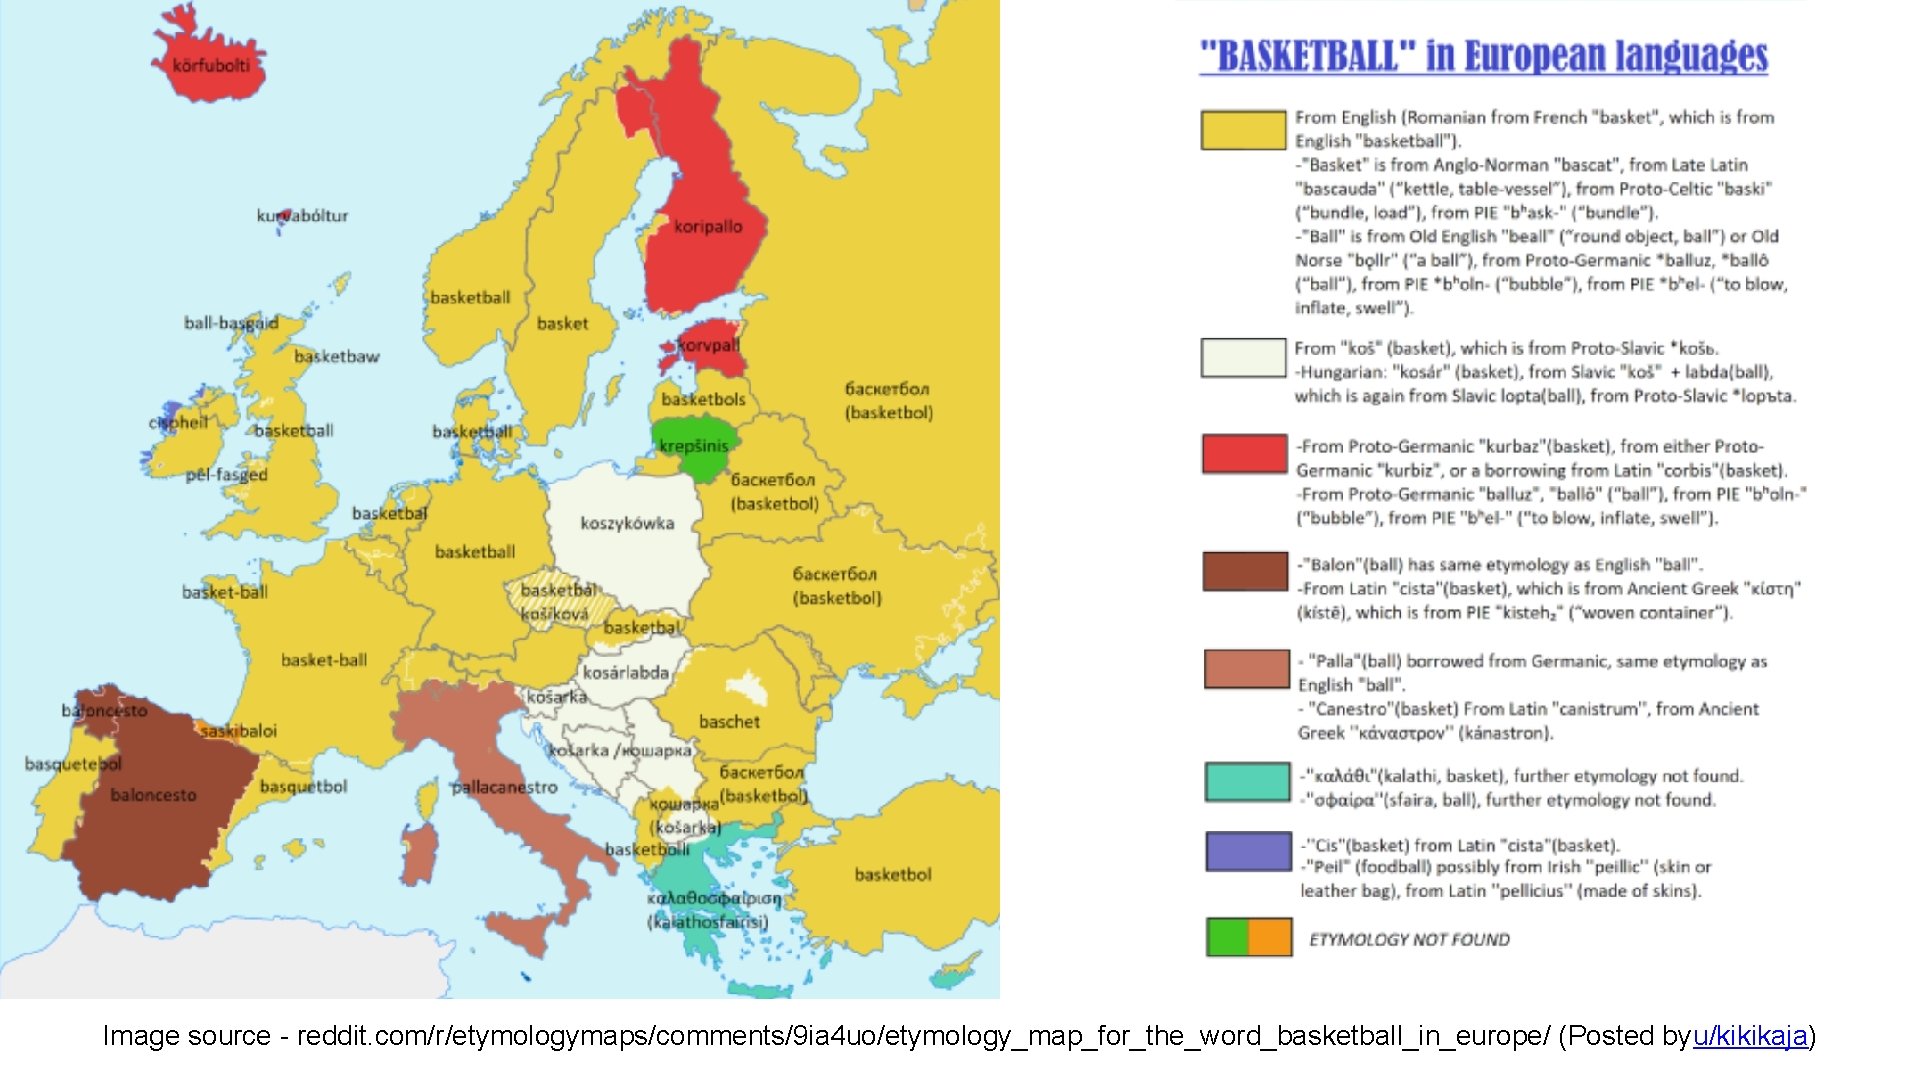 Image source - reddit. com/r/etymologymaps/comments/9 ia 4 uo/etymology_map_for_the_word_basketball_in_europe/ (Posted byu/kikikaja) 